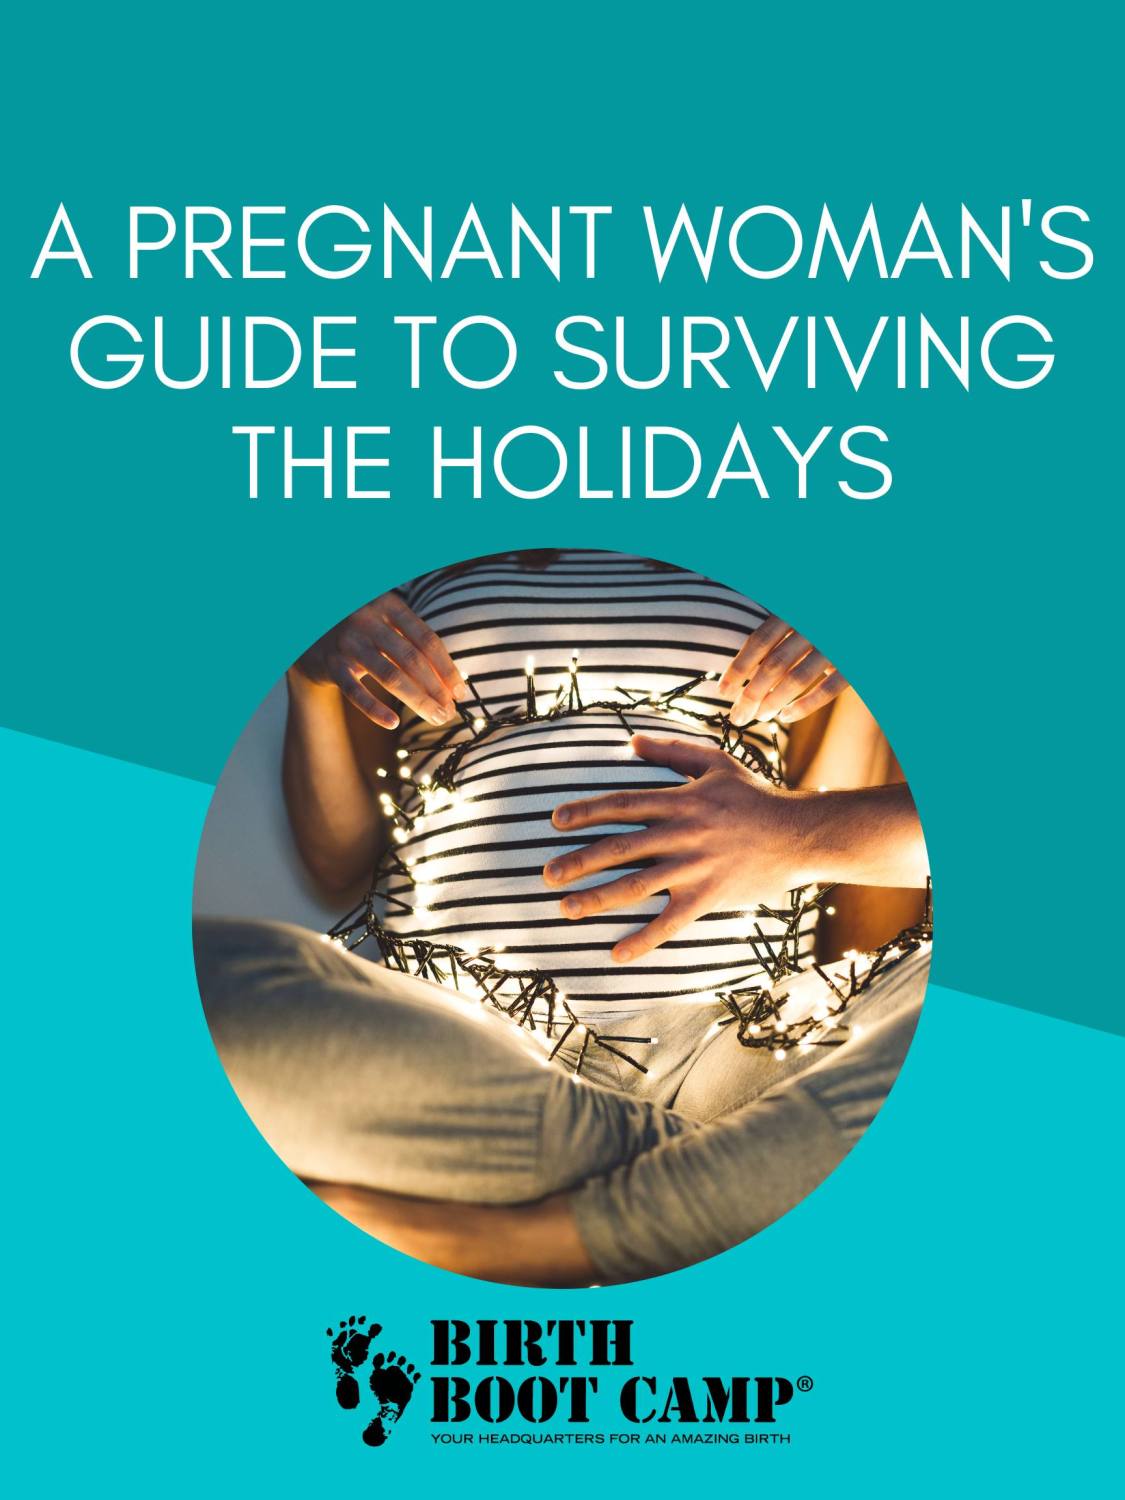 A Pregnant Woman’s Guide To Surviving the Holidays